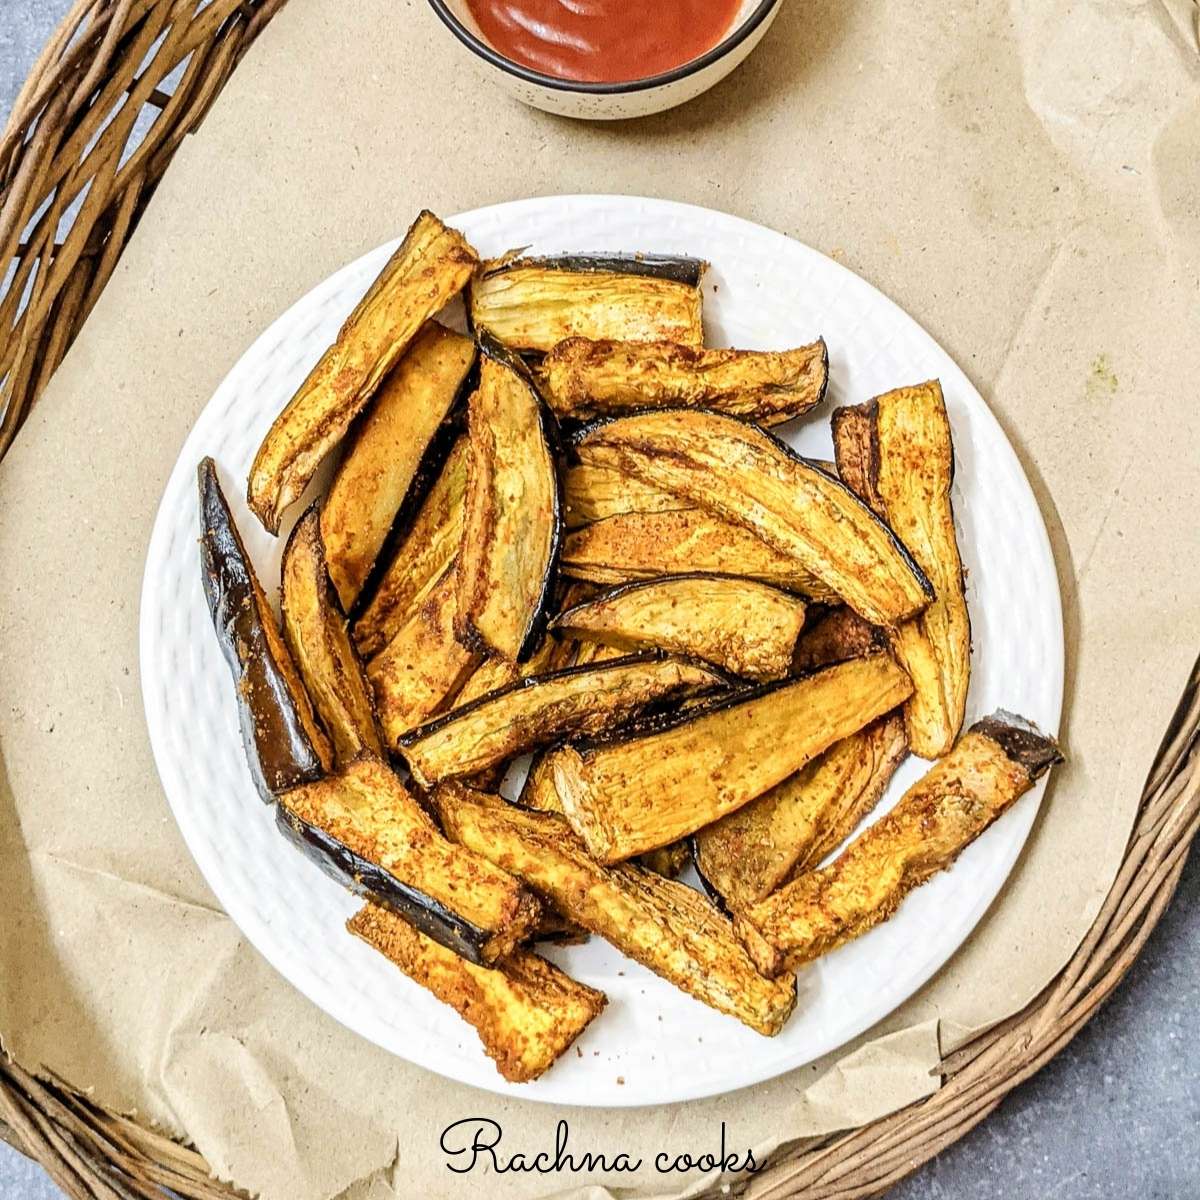 Air fryer Eggplant (Step-by-step Pictures + Video)